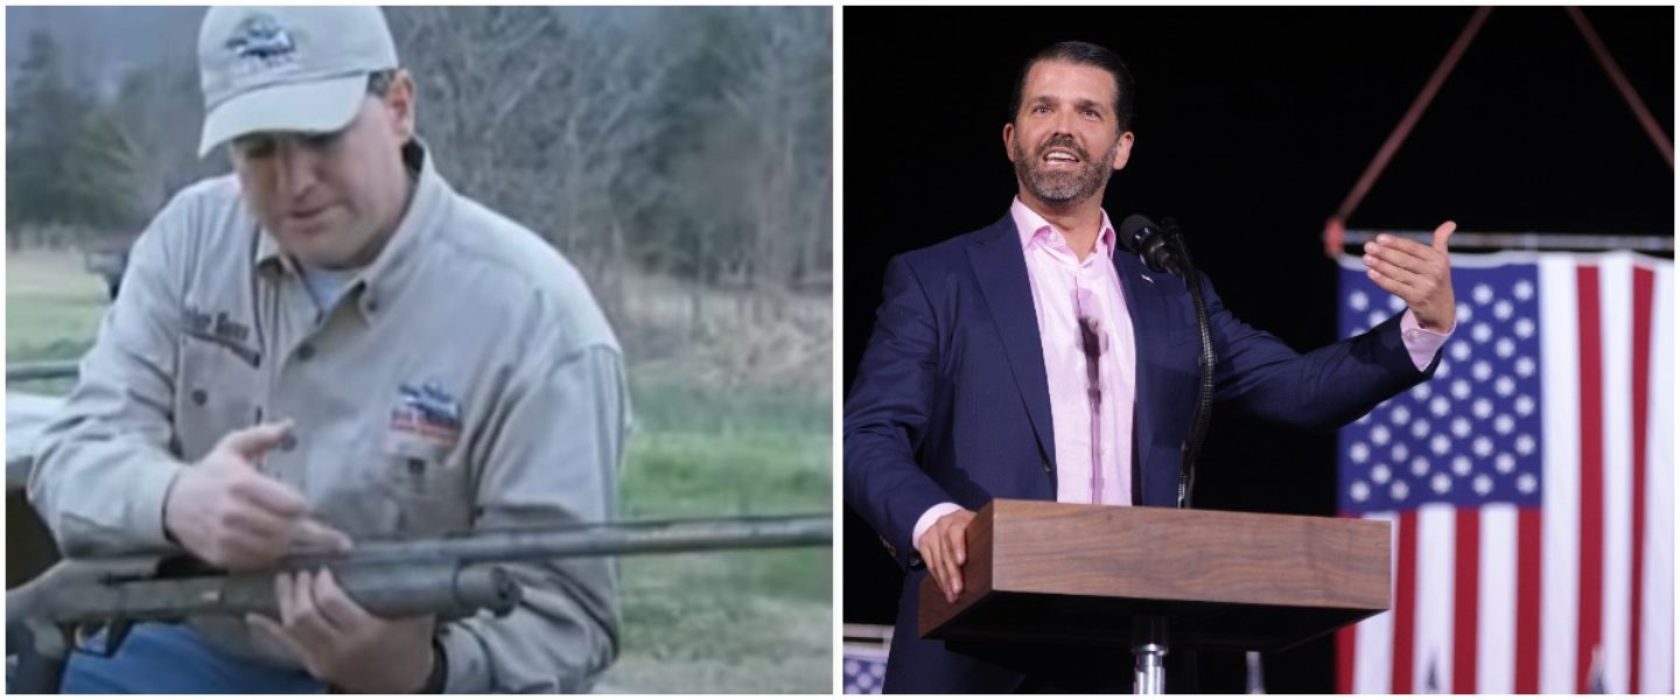 EXCLUSIVE: Don Jr’s Newest Gun-Making ‘Buddy’ Is The Father Of Hunter Biden’s Baby Mama